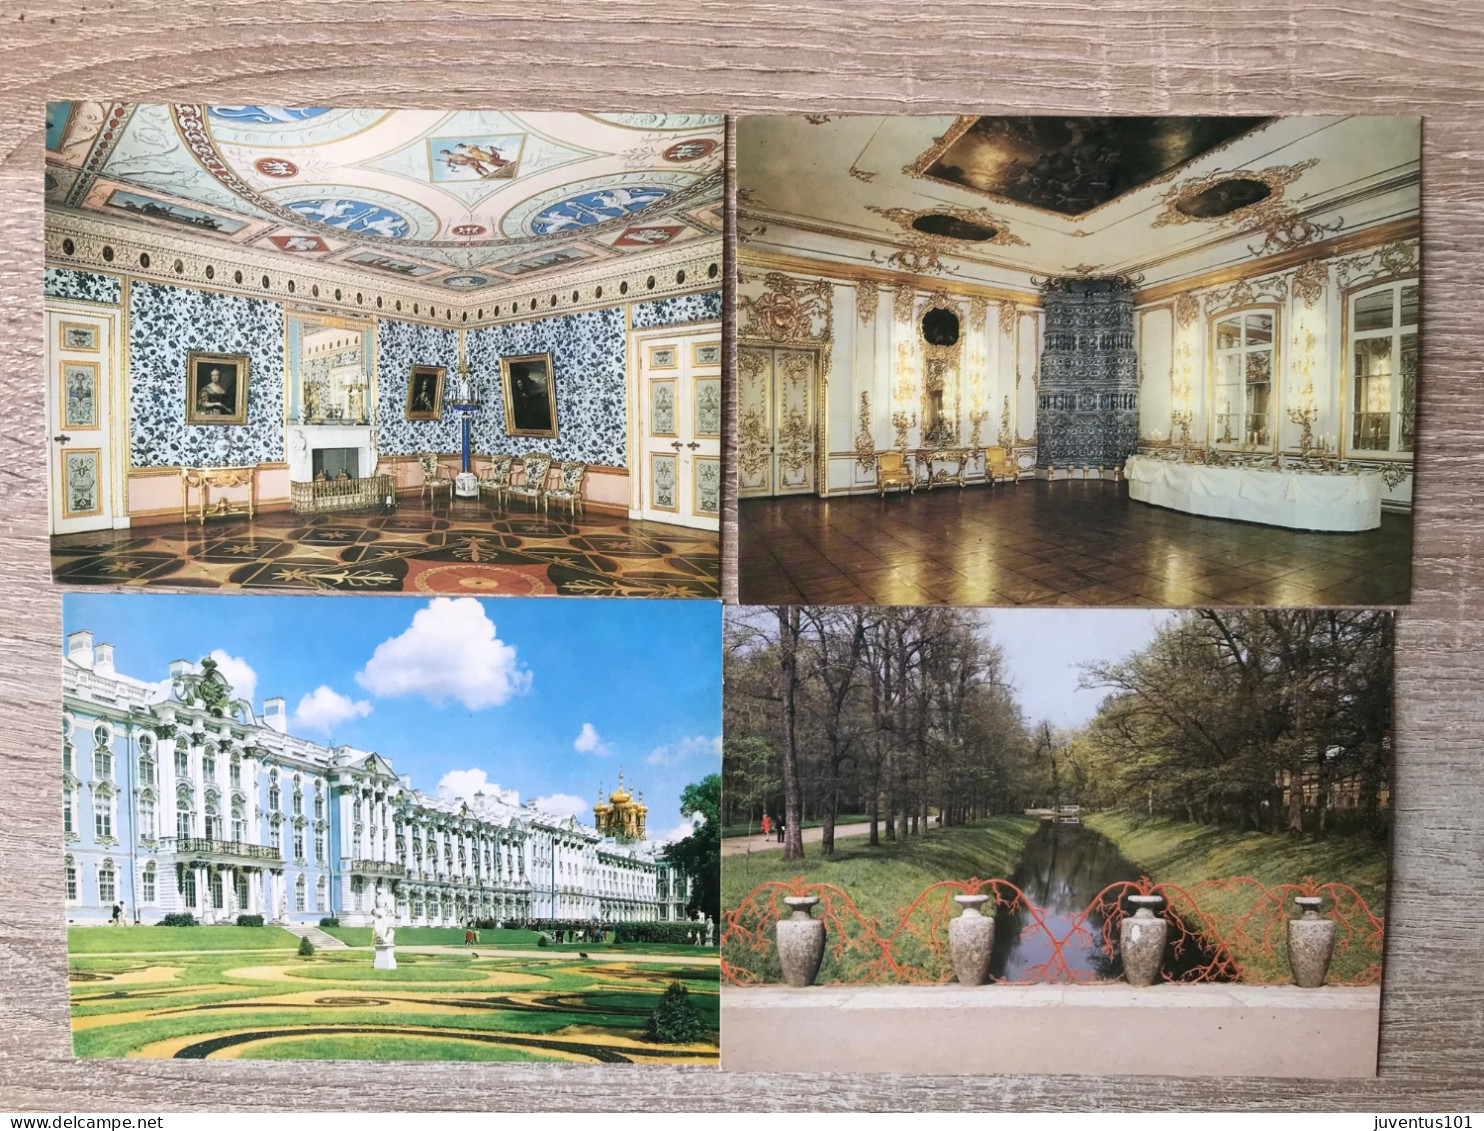 Carnet 16 CPSM Pouchkine-Pushkine The Palace And Parks - Russia